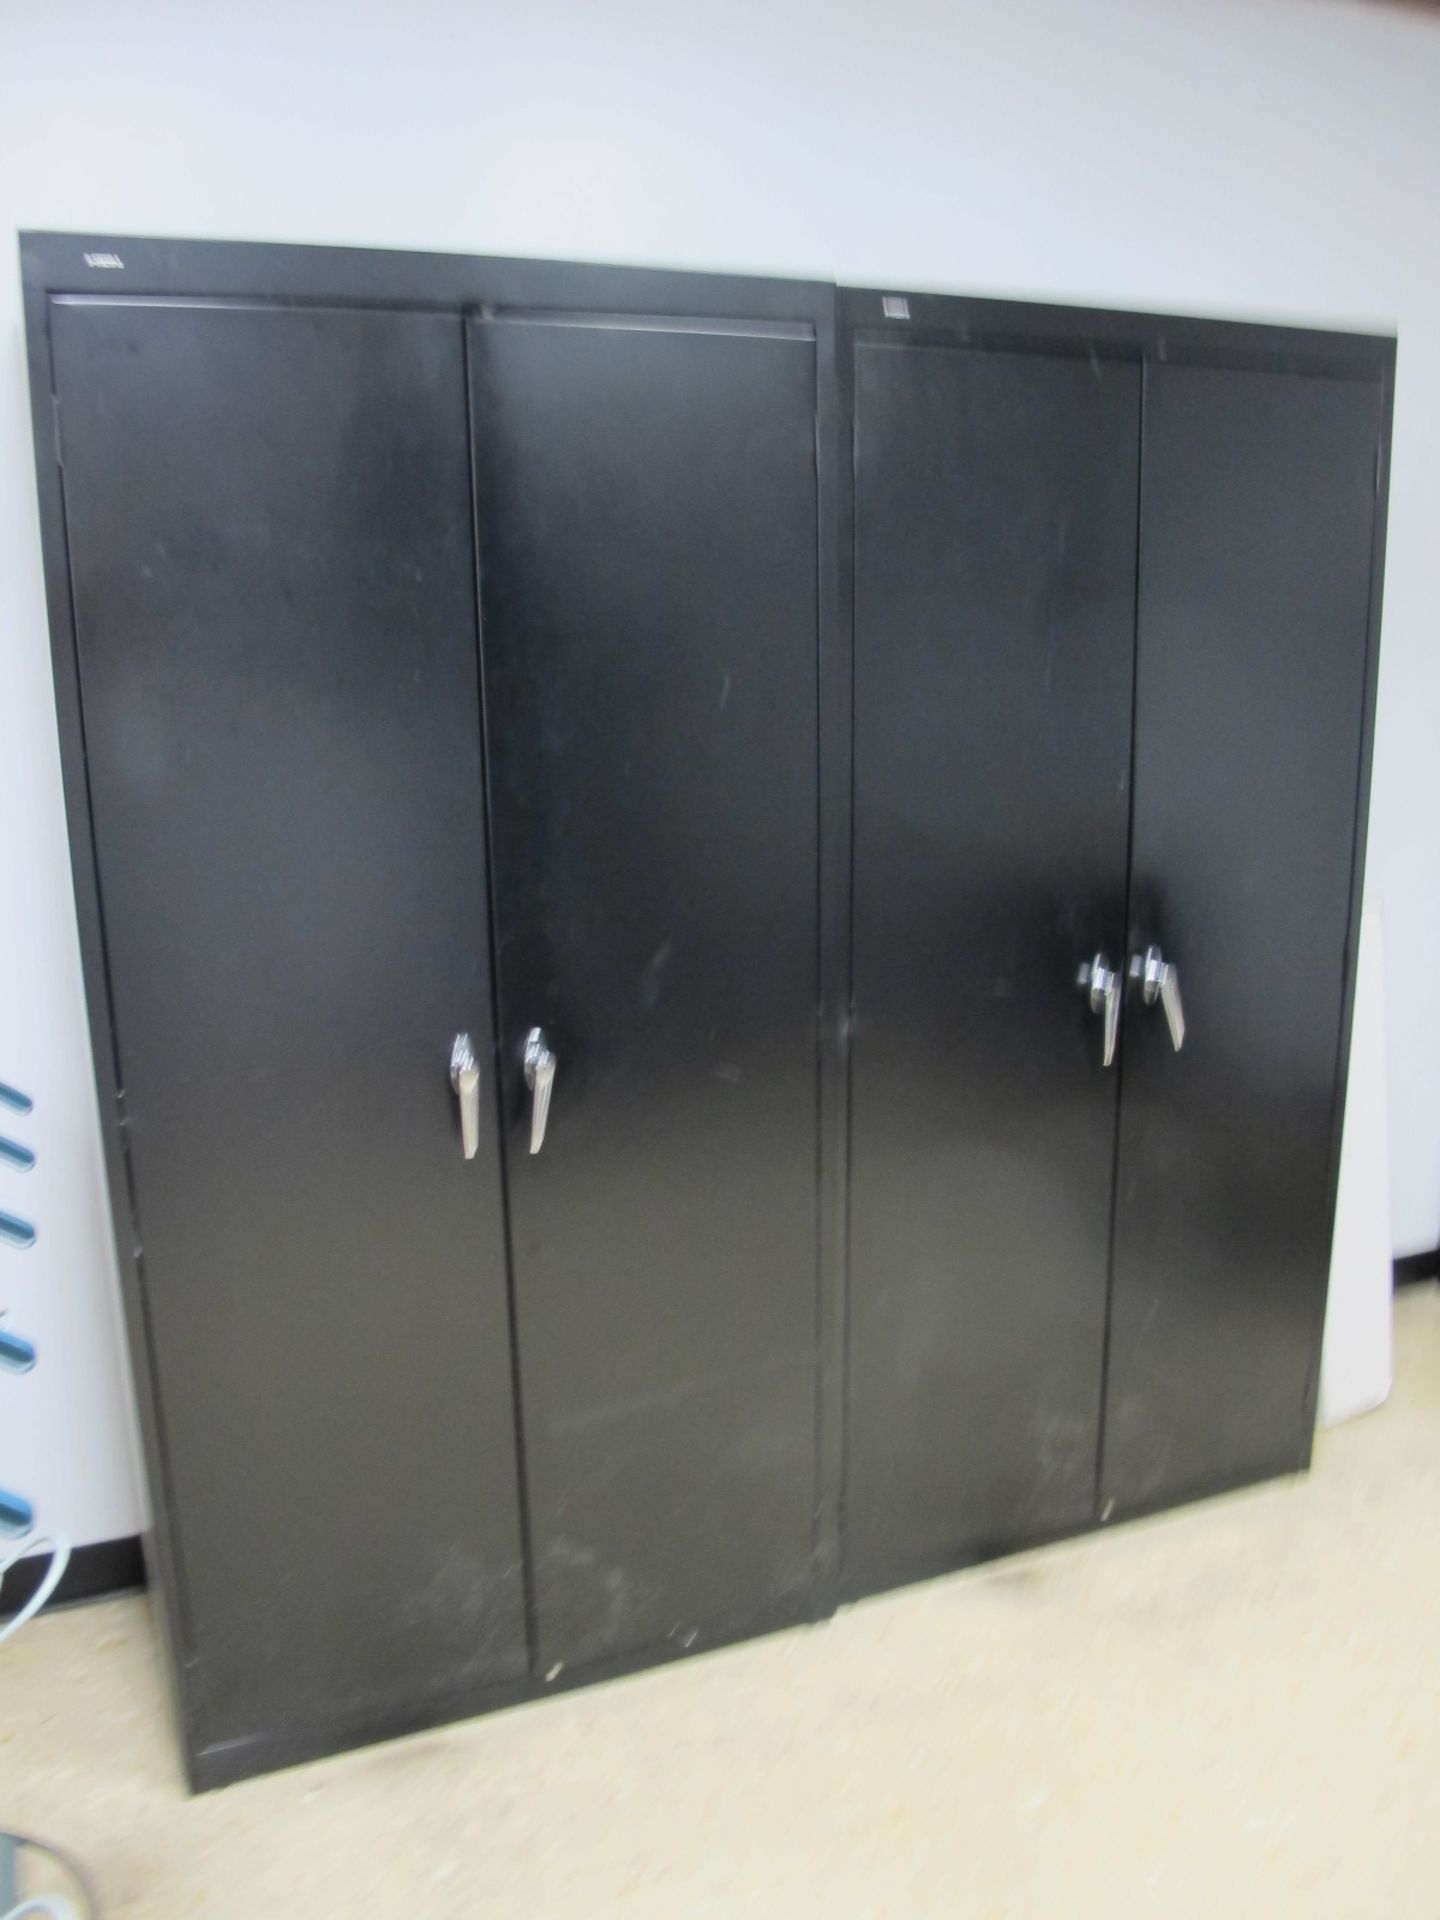 Cabinets and file cabinets